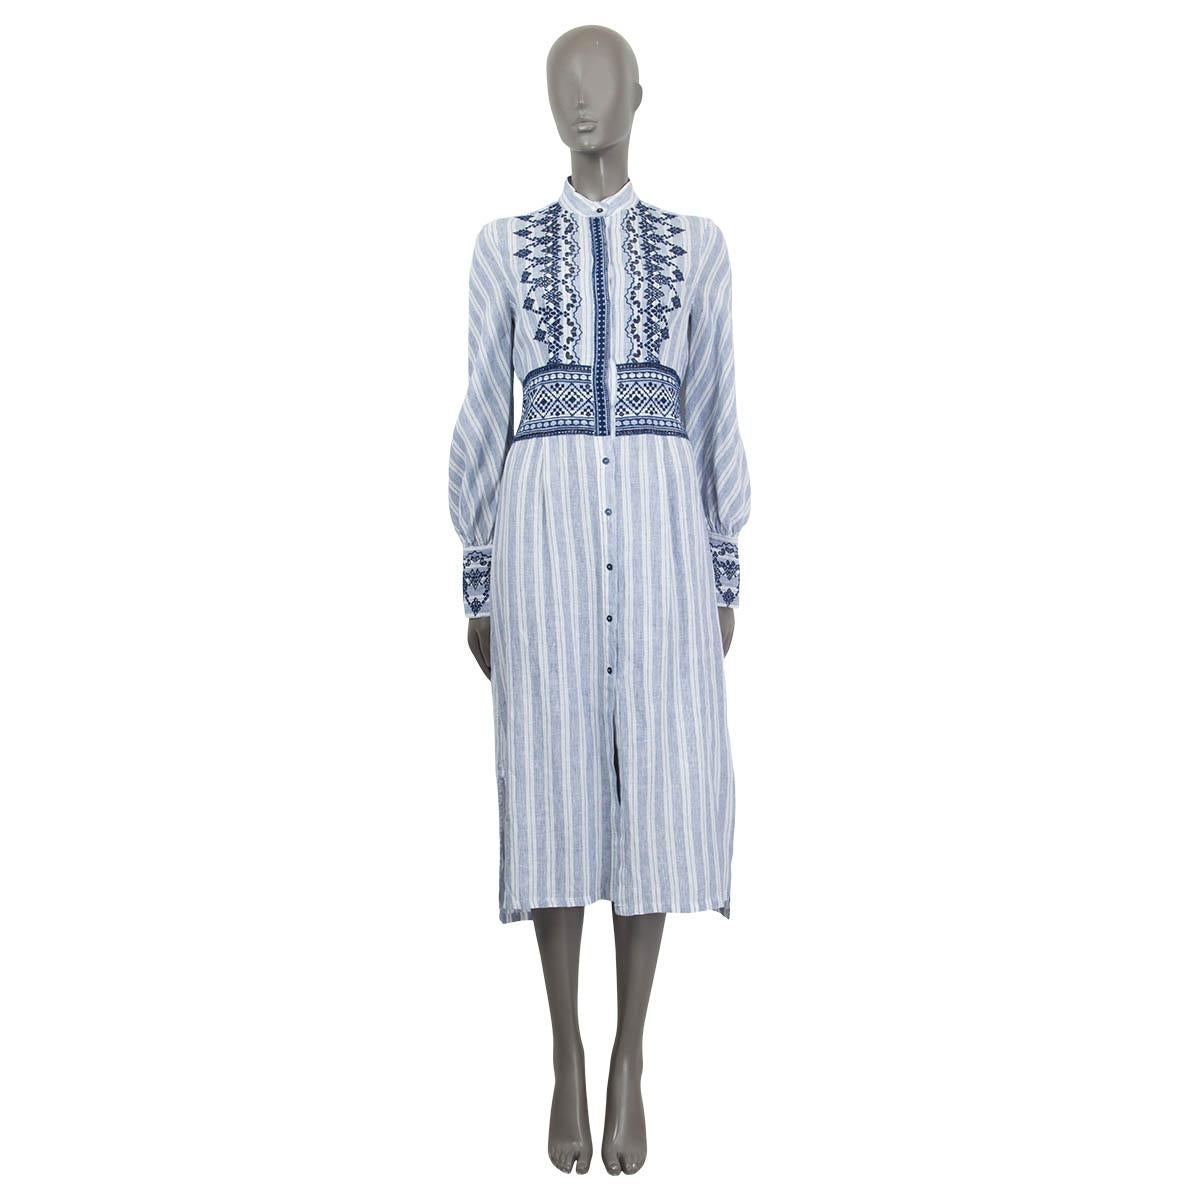 100% authentic Ermanno Scervino Life long sleeve cut out maxi dress in white and blue linen (100%). Features embroideries at the waist, chest and the cuffs. Opens with eleven buttons on the front. Unlined. Has been worn and is in excellent